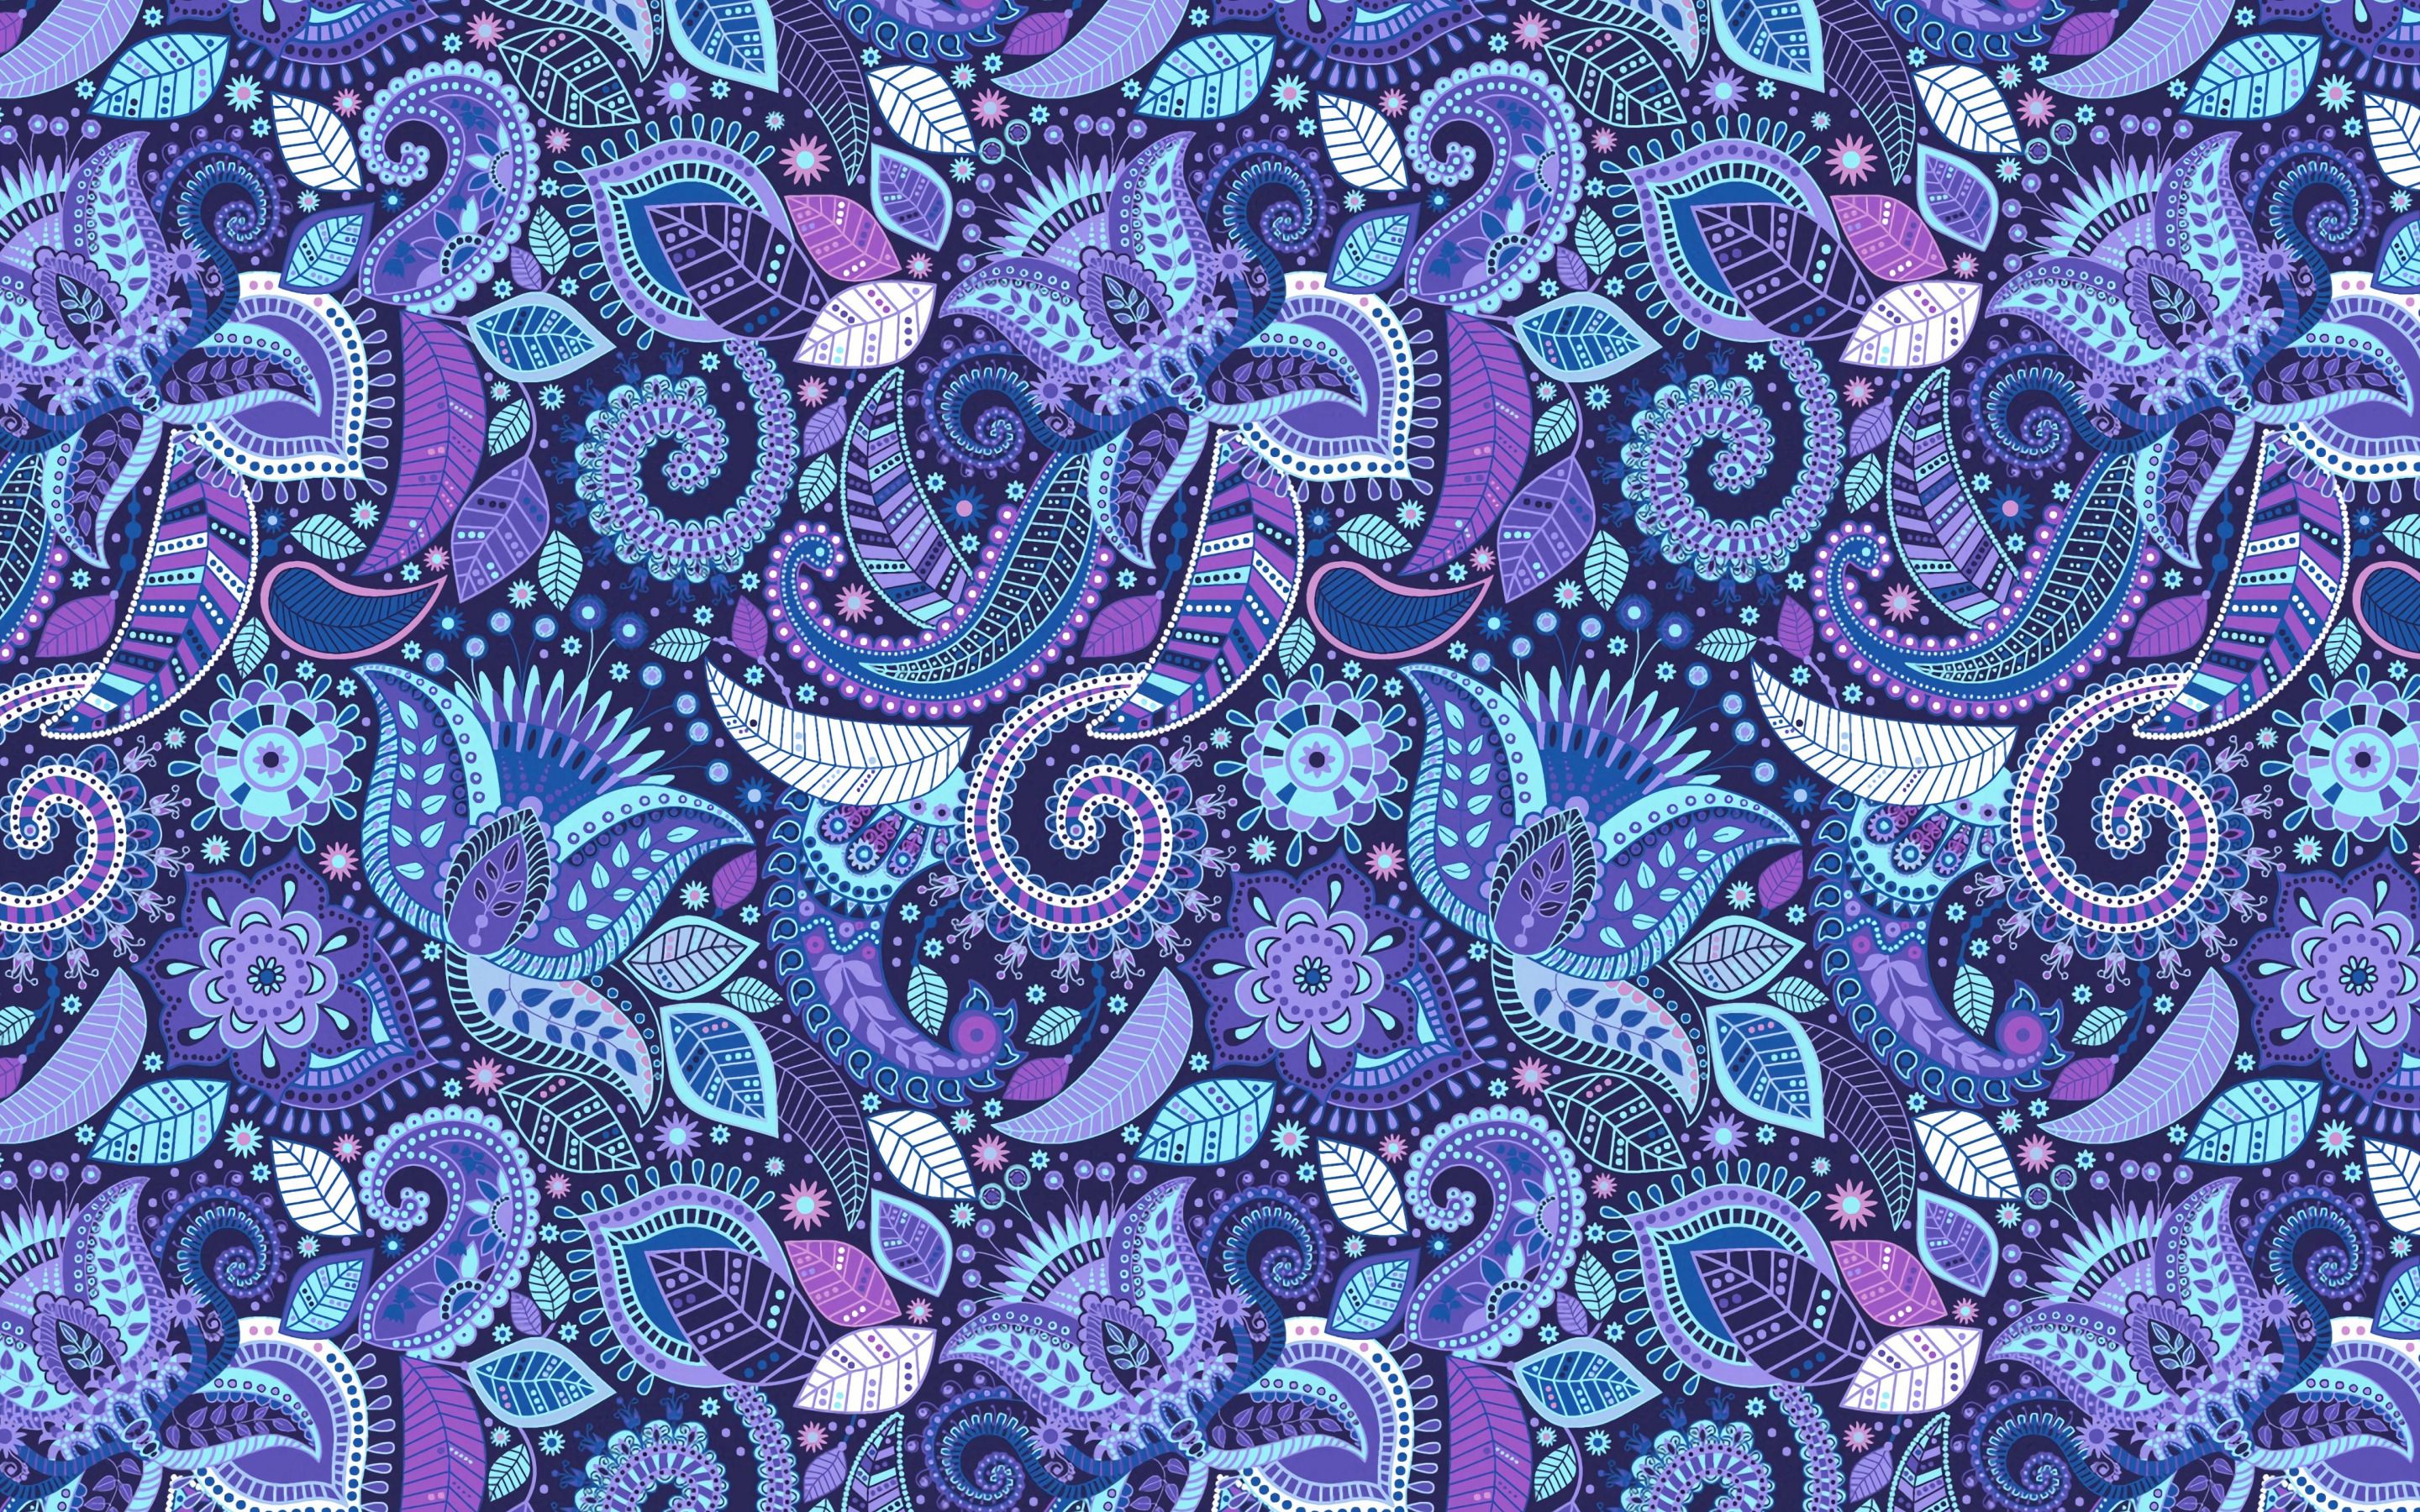 Download wallpaper paisley blue texture, paisley pattern, buta, Persian designs, creative blue background, paisley background for desktop with resolution 2880x1800. High Quality HD picture wallpaper